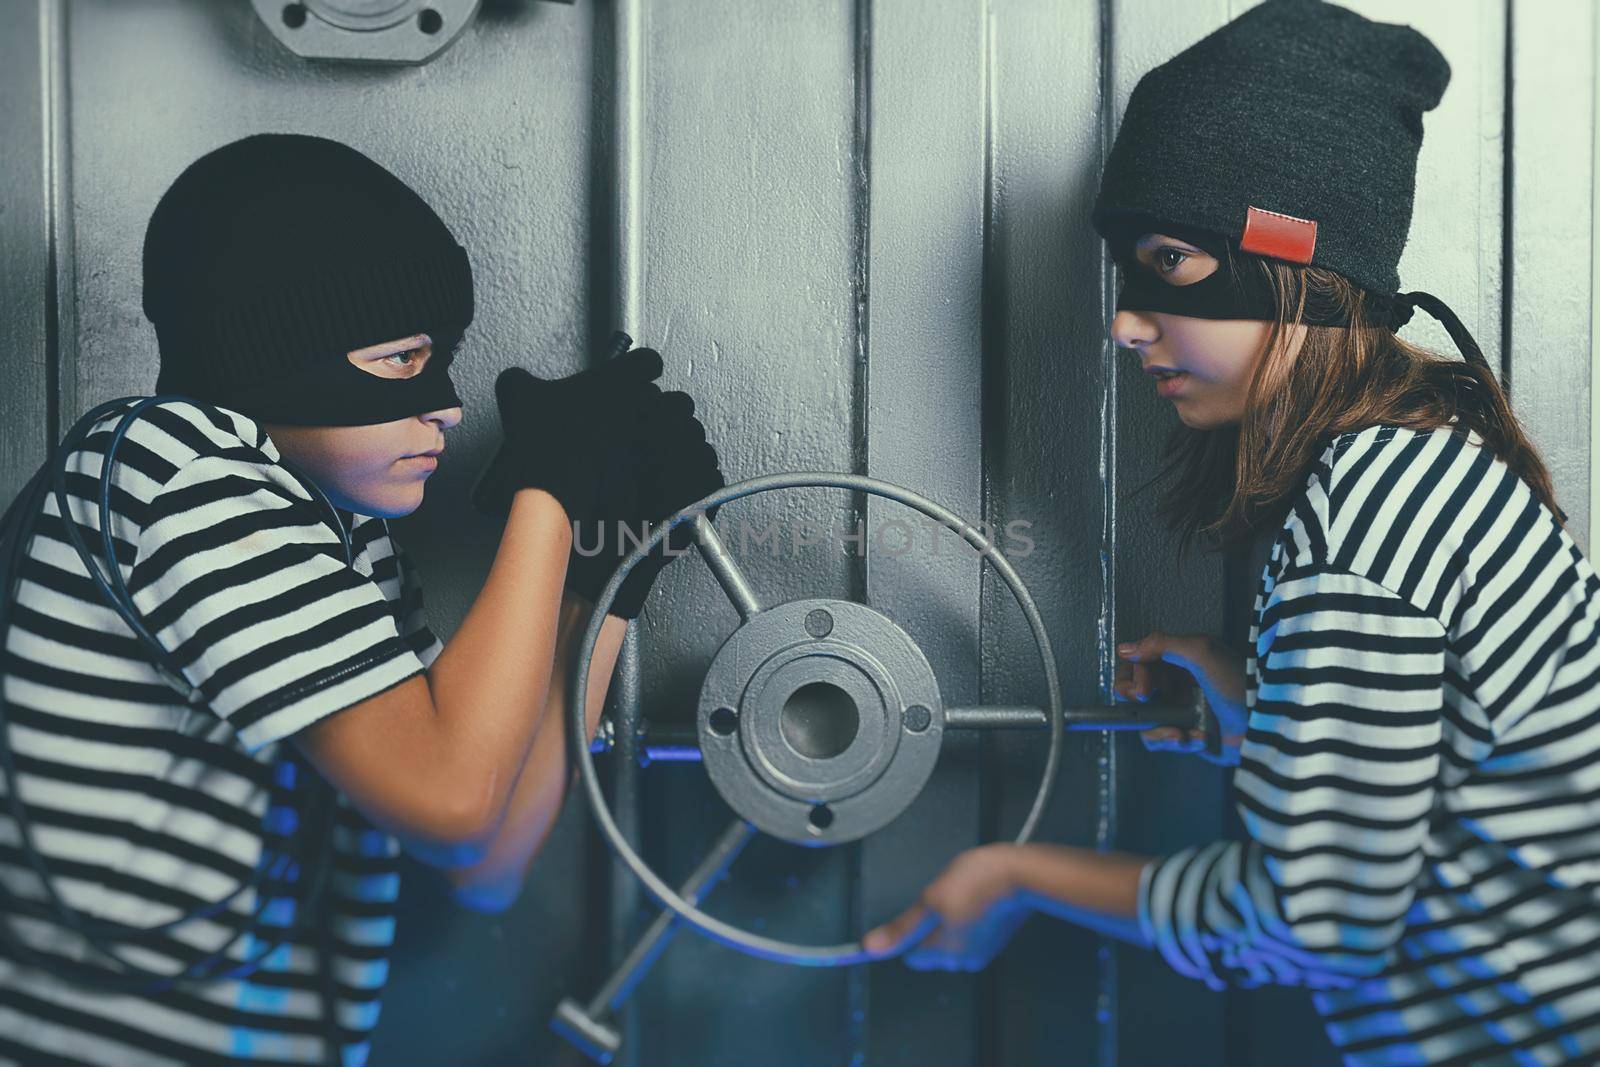 photosession of children in the image of a Bank robber